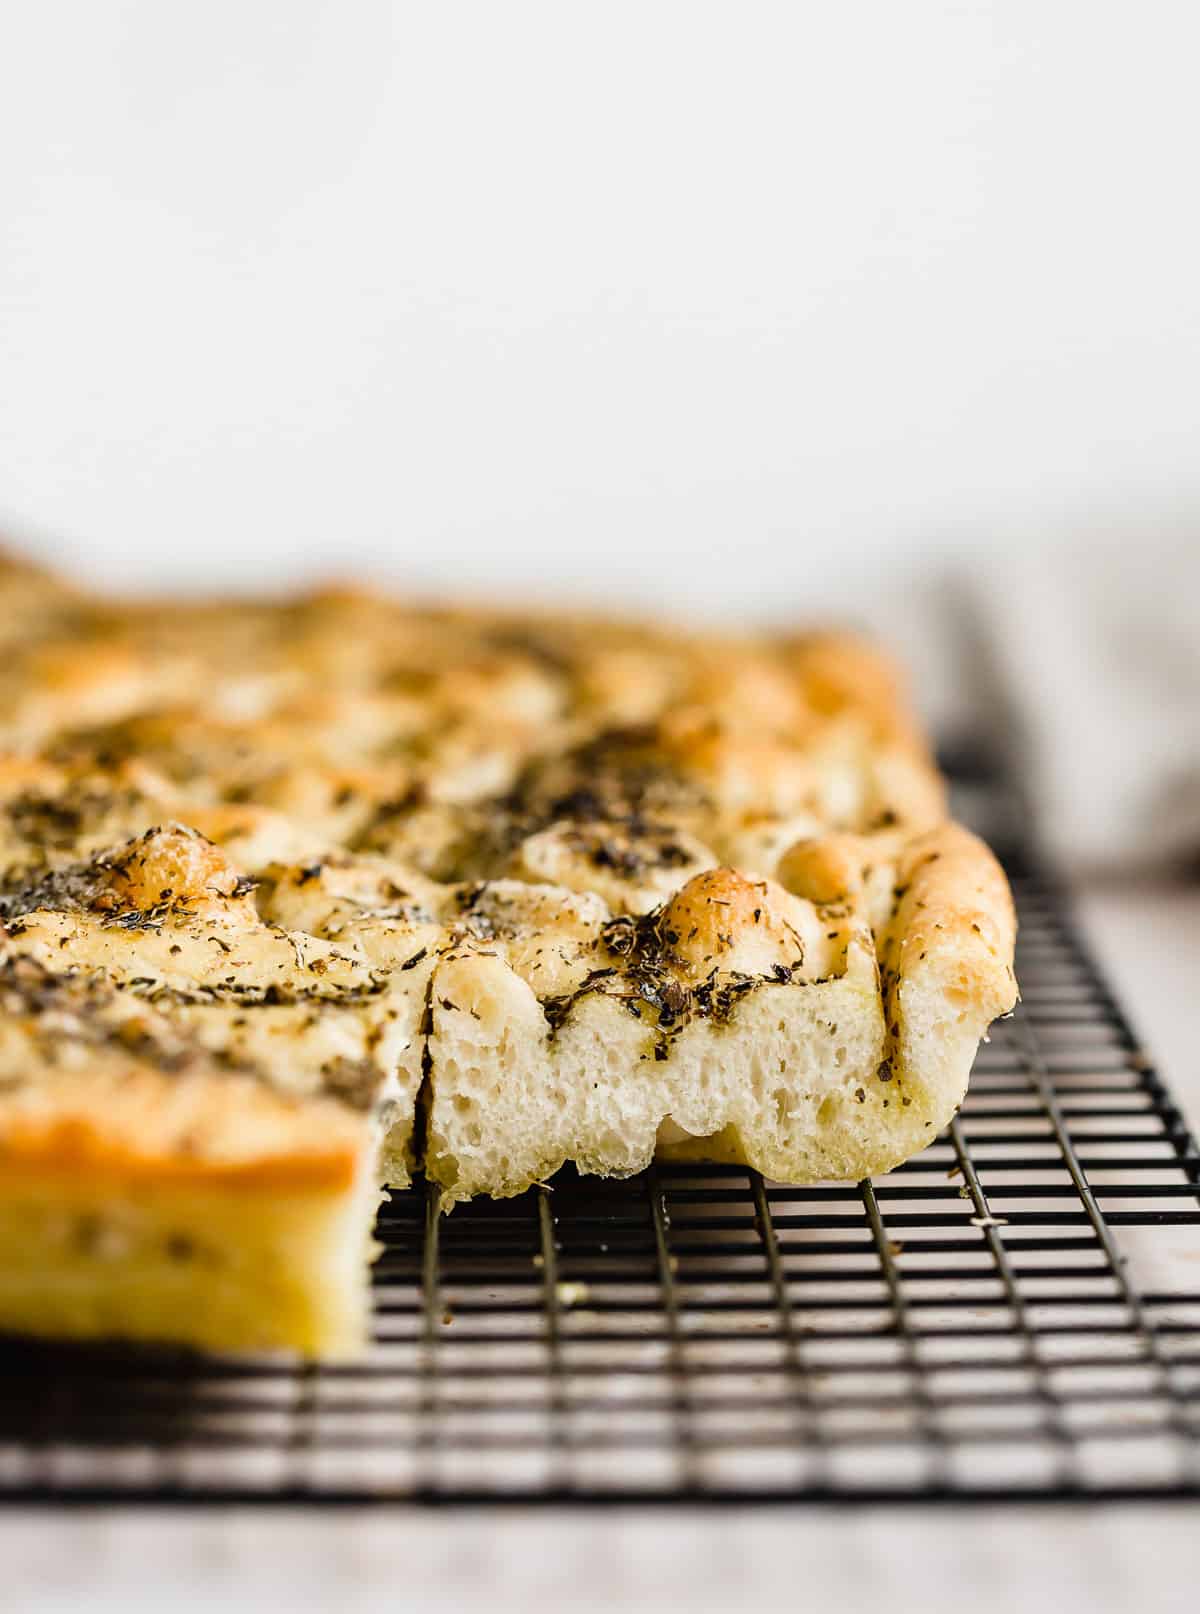 A side photo of a fluffy focaccia recipe showing the thick bread topped with herb olive oil.